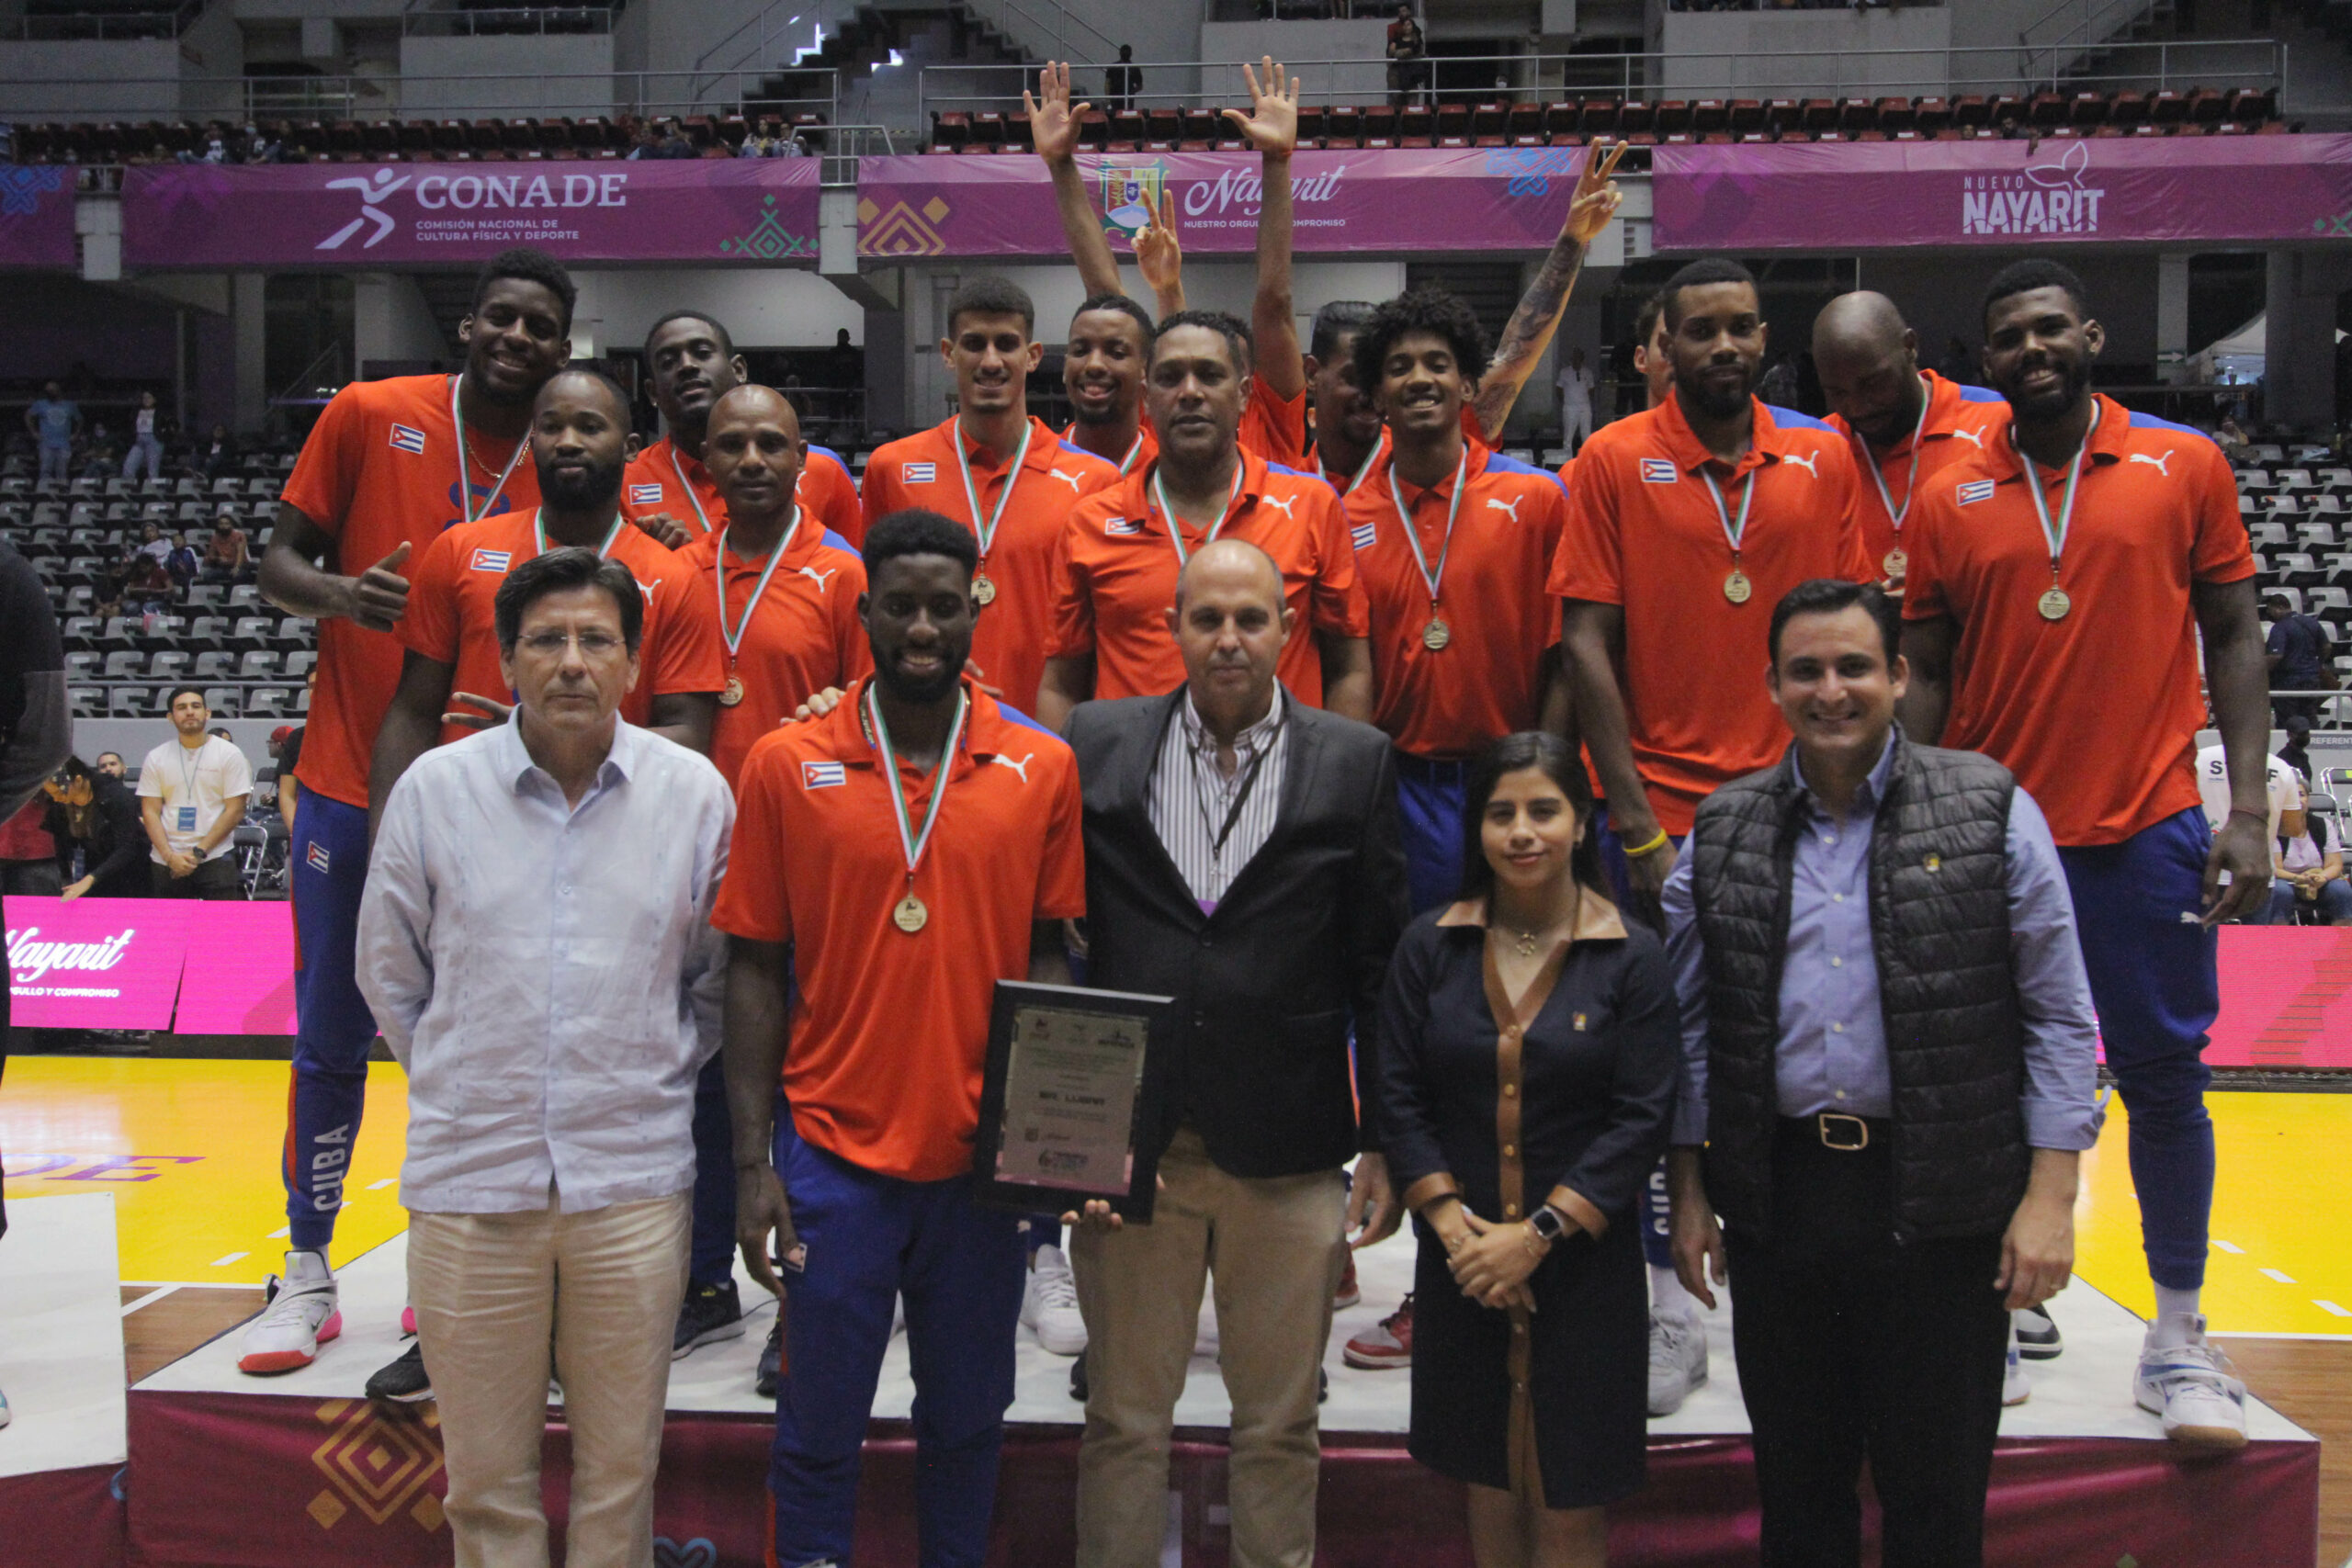 Cuba is the undefeated Pan American NORCECA Final Six Champion